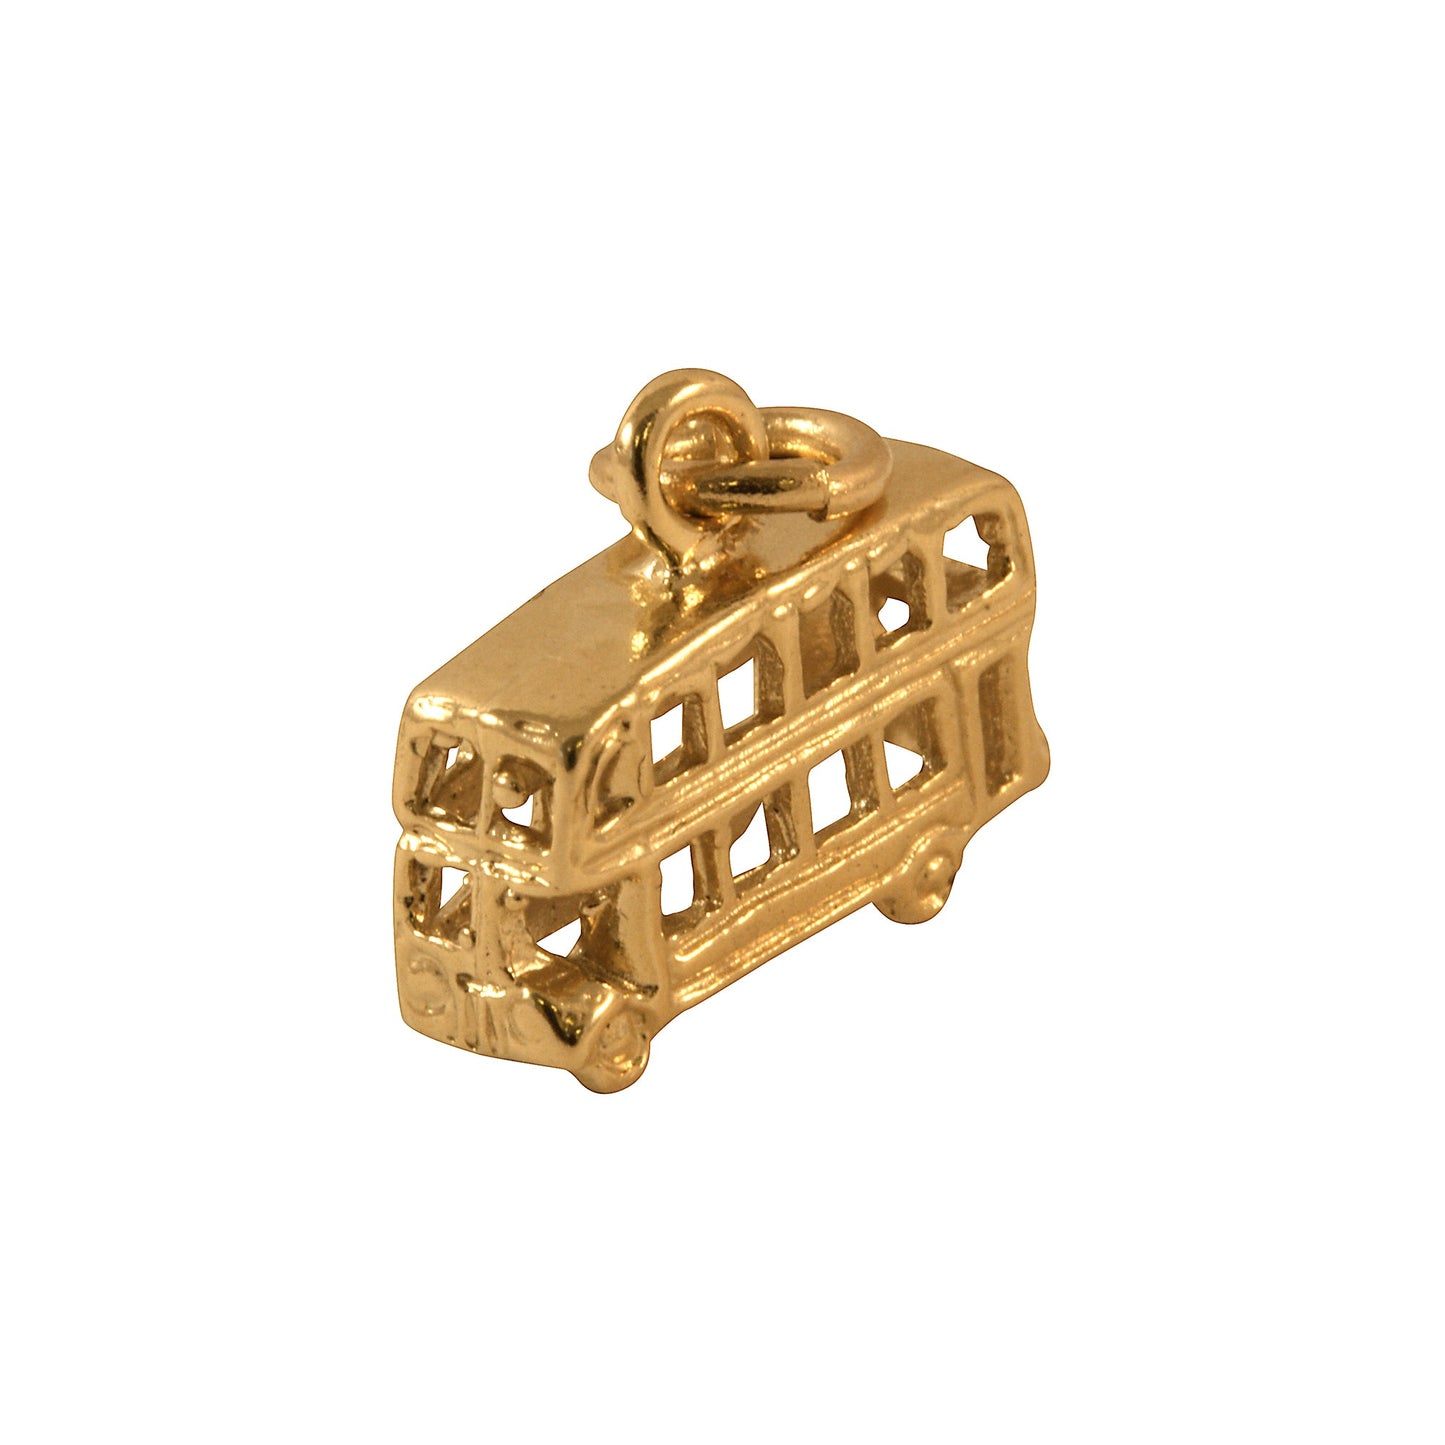 9ct Gold Routemaster Bus Charm